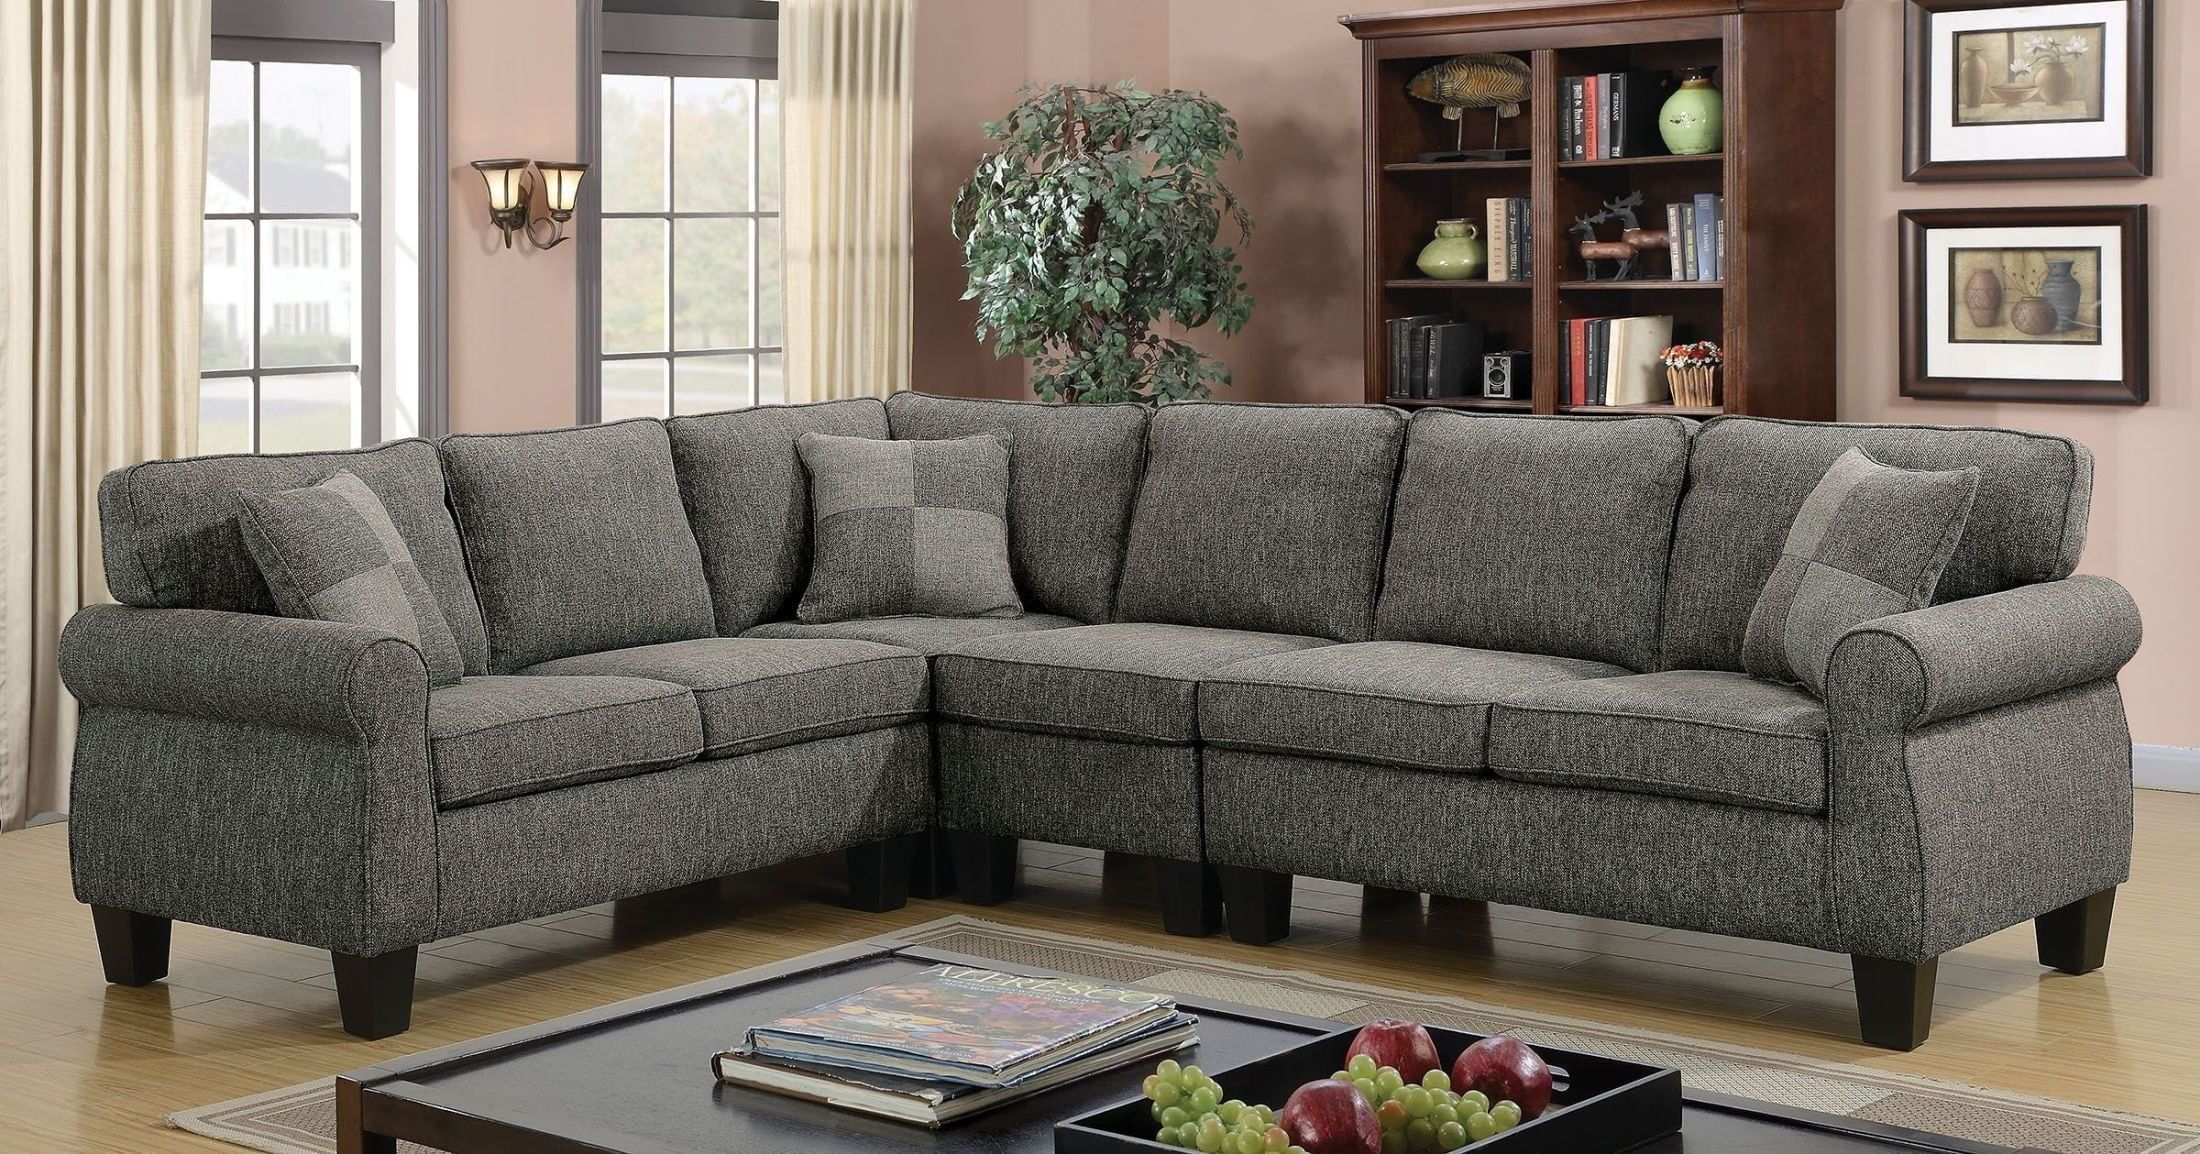 Rhian Dark Gray Sectional From Furniture Of America | Coleman Furniture For Dark Gray Sectional Sofas (View 3 of 20)